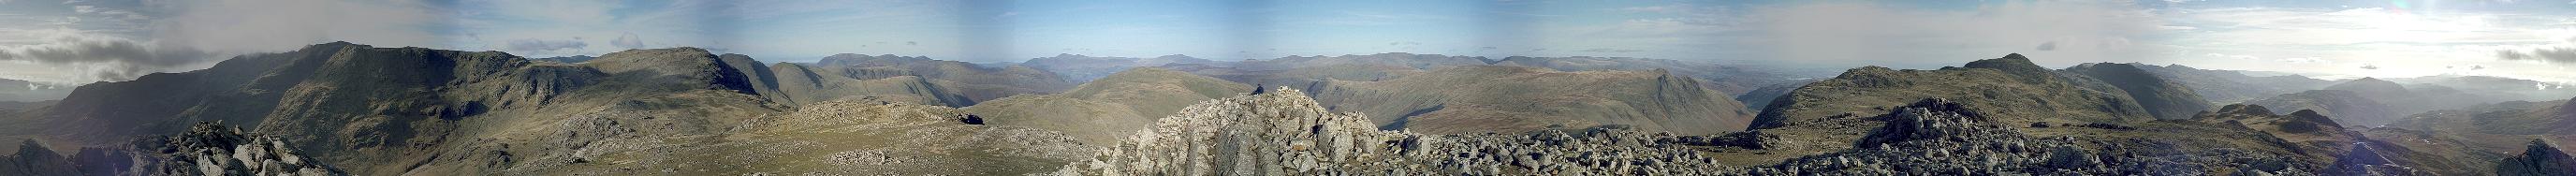 Esk Pike - Complete Panorama